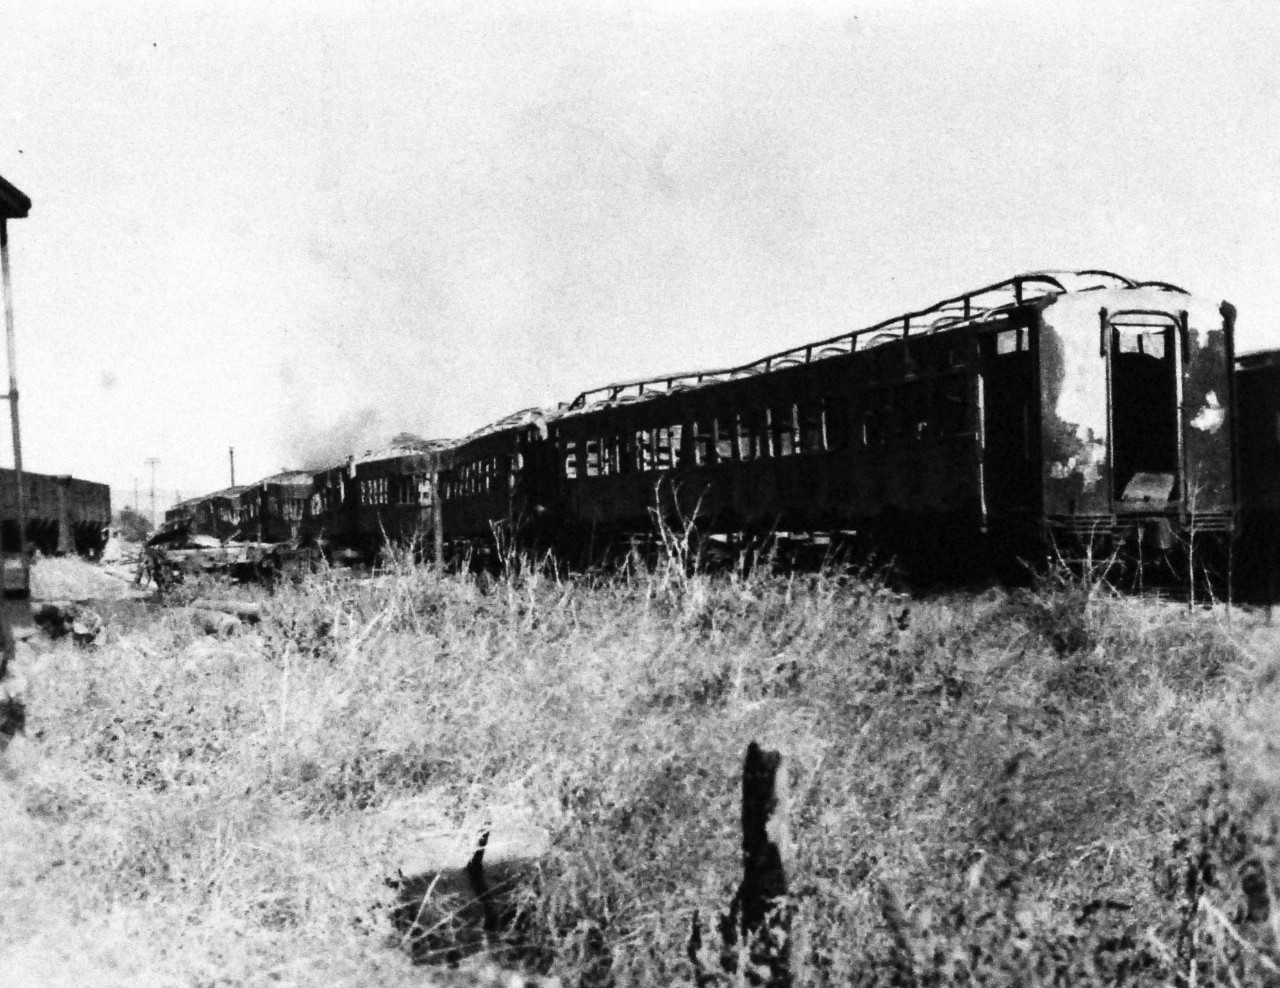 127-GW-1643-146886:   Nagasaki, Japan, 1945.    Bombed and burned railroad cars at Minami Kumamoto railroad station.  Photographed by Rogers at Nagasaki, Japan, October 28, 1945.        Official U.S. Marine Corps Photograph, now in the collections of the National Archives.  (2016/10/25).